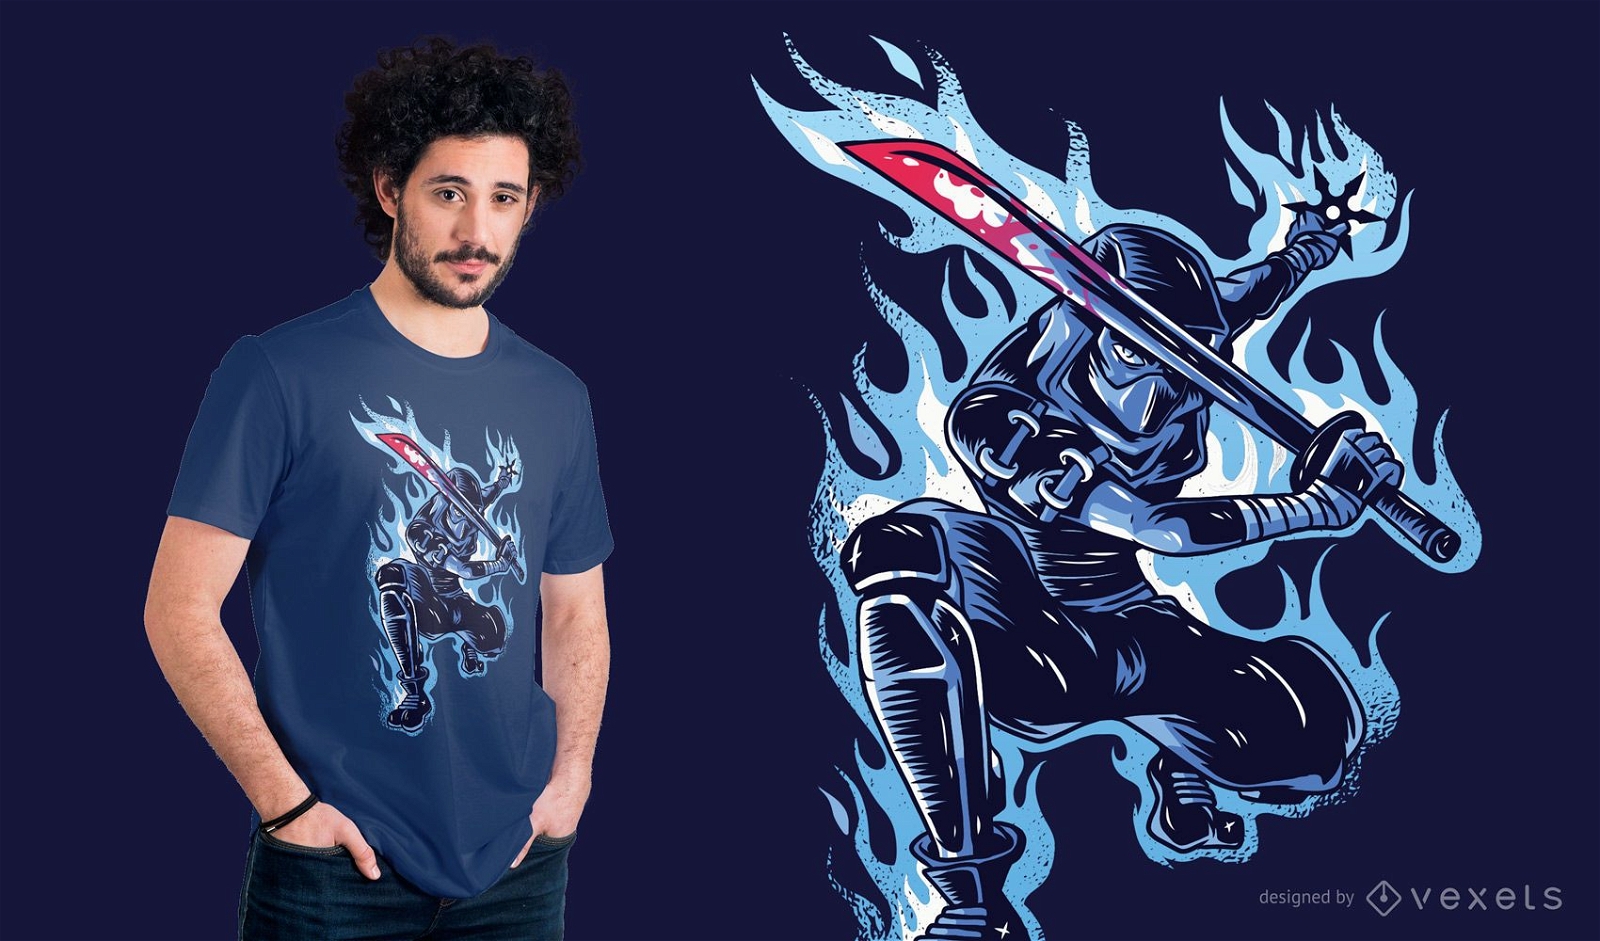 Ninja T Shirt designs, themes, templates and downloadable graphic